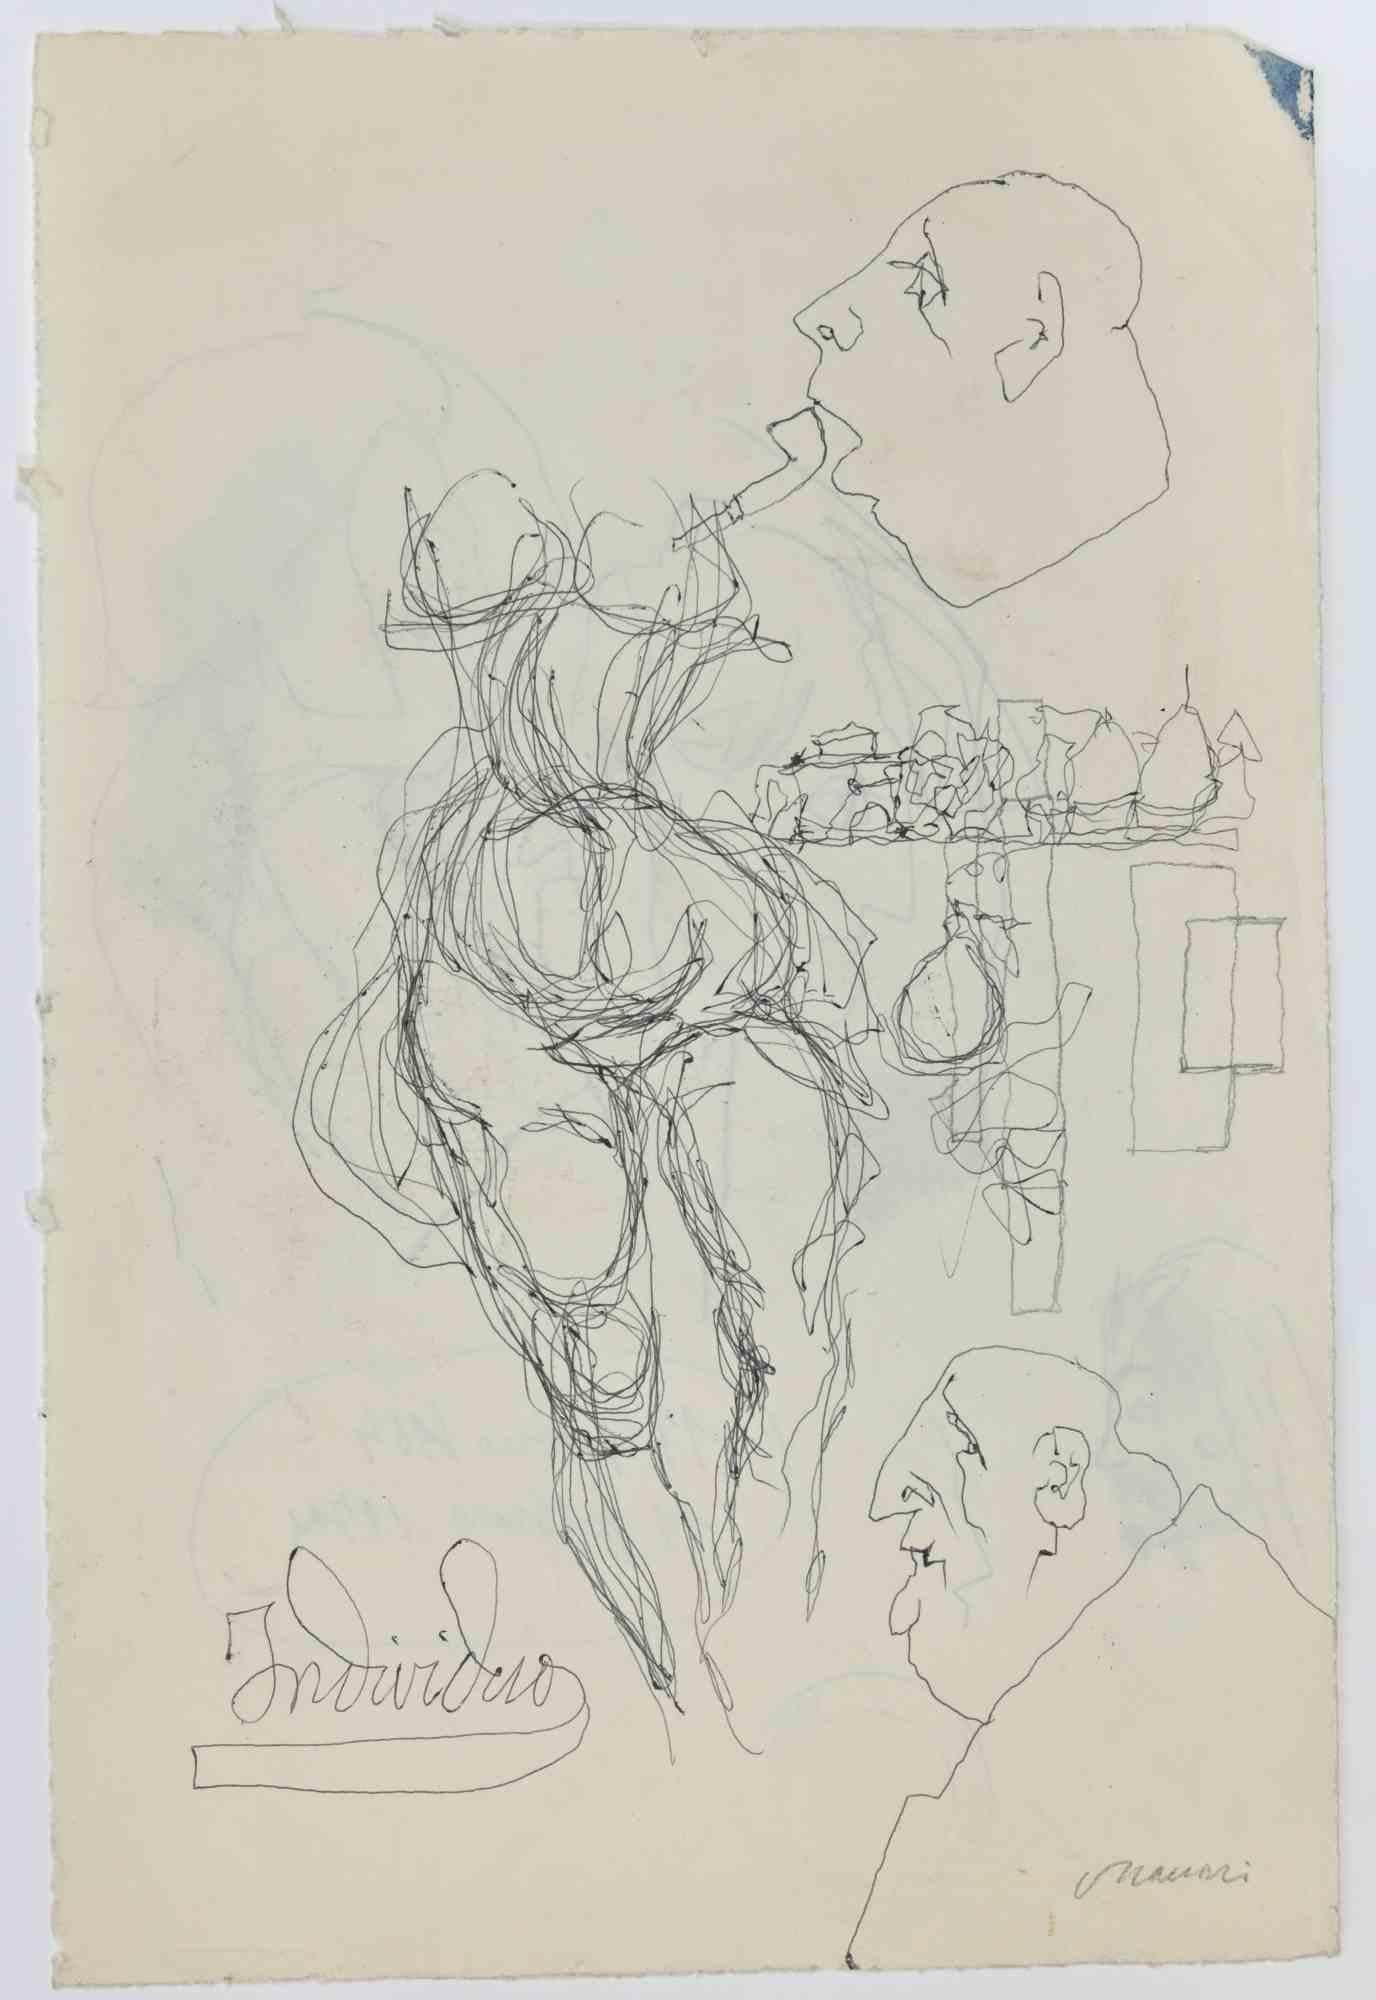 Profiles is a Pen Drawing realized by Mino Maccari  (1924-1989) in the 1960s.

Hand-signed on the lower with another drawing on the rear.

Good condition with slight folding.

Mino Maccari (Siena, 1924-Rome, June 16, 1989) was an Italian writer,